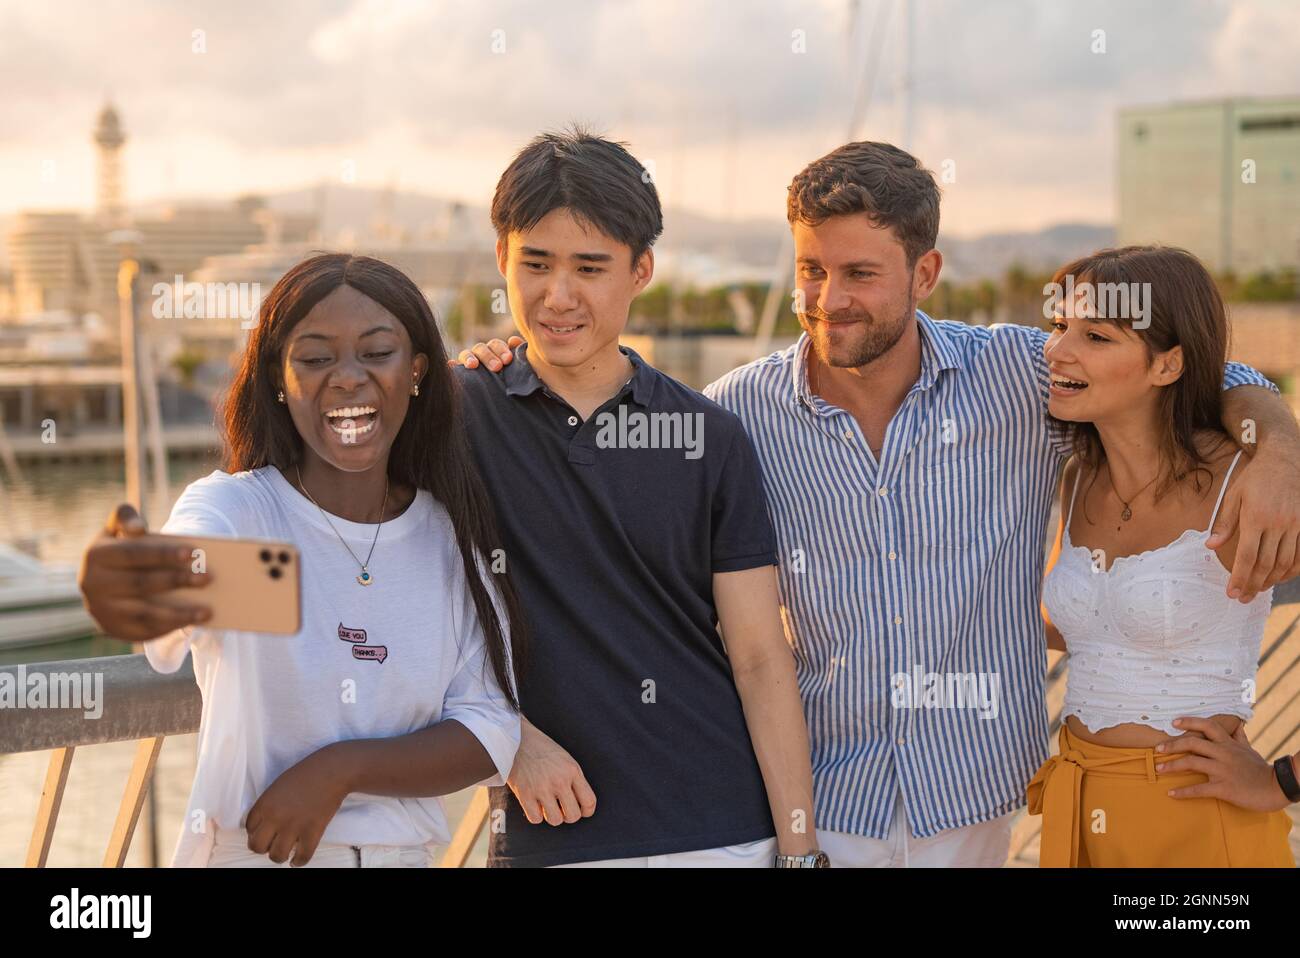 Group of content multiracial young men and women watching funny content on mobile phone or taking selfie while standing together on embankment in summer evening Stock Photo